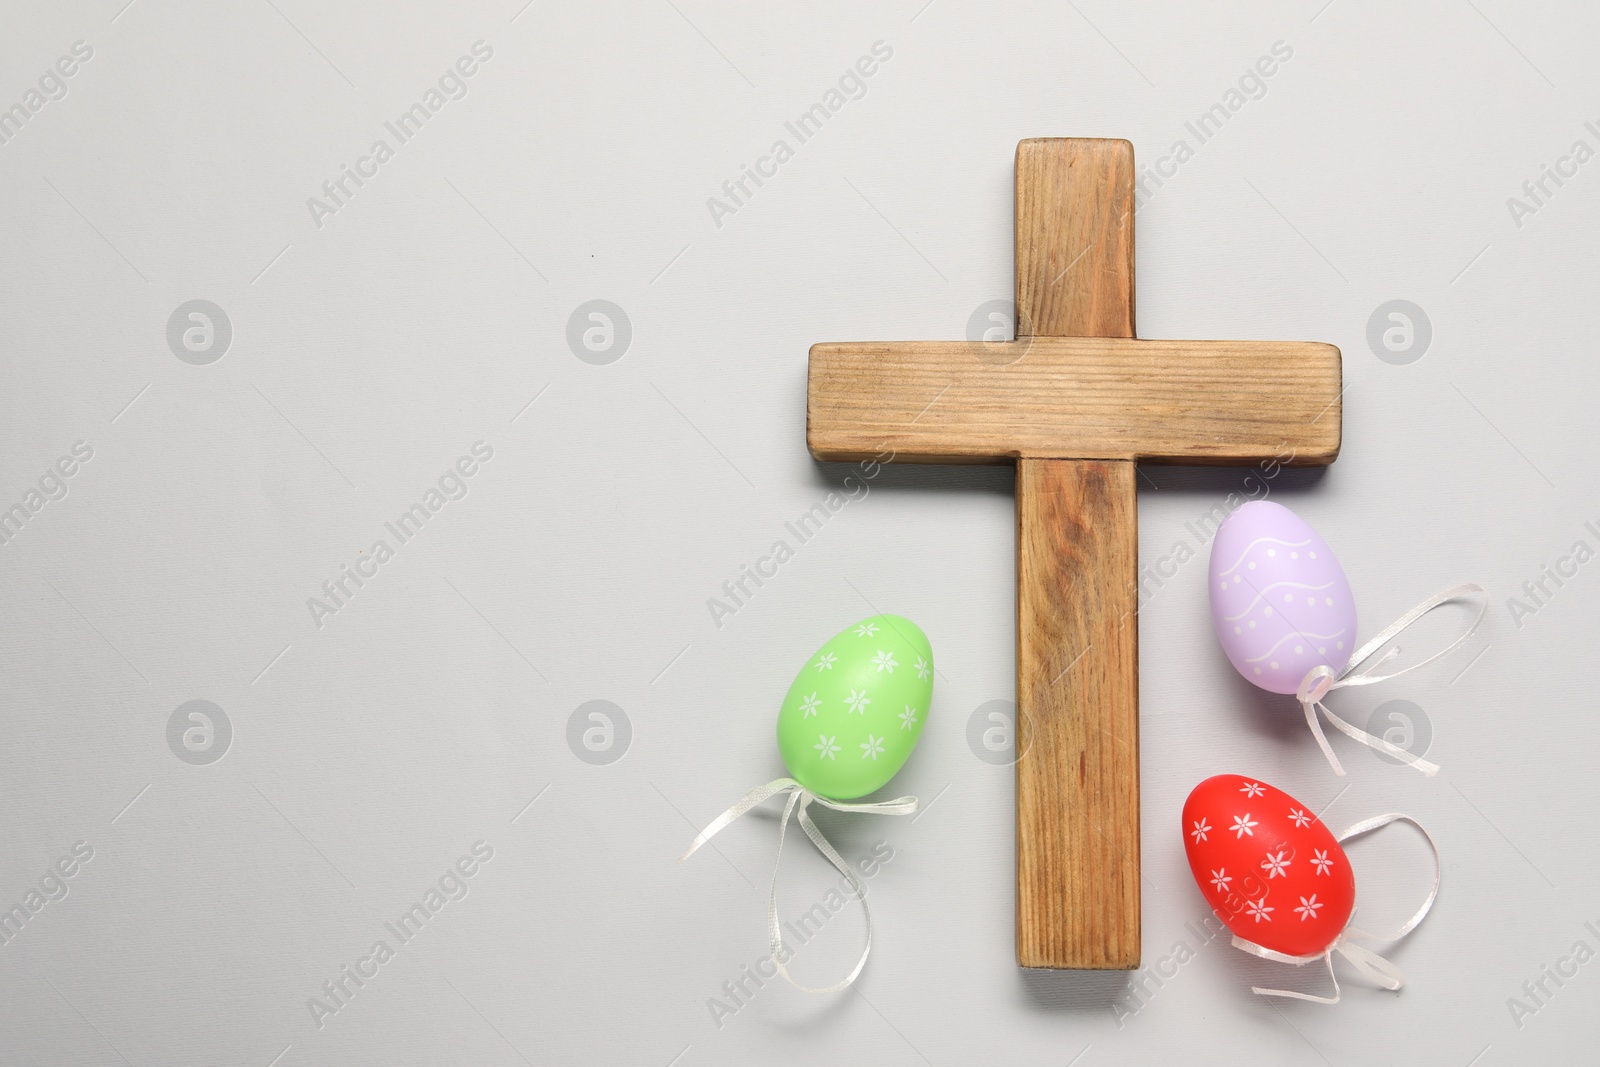 Photo of Wooden cross and painted Easter eggs on light grey background, flat lay. Space for text